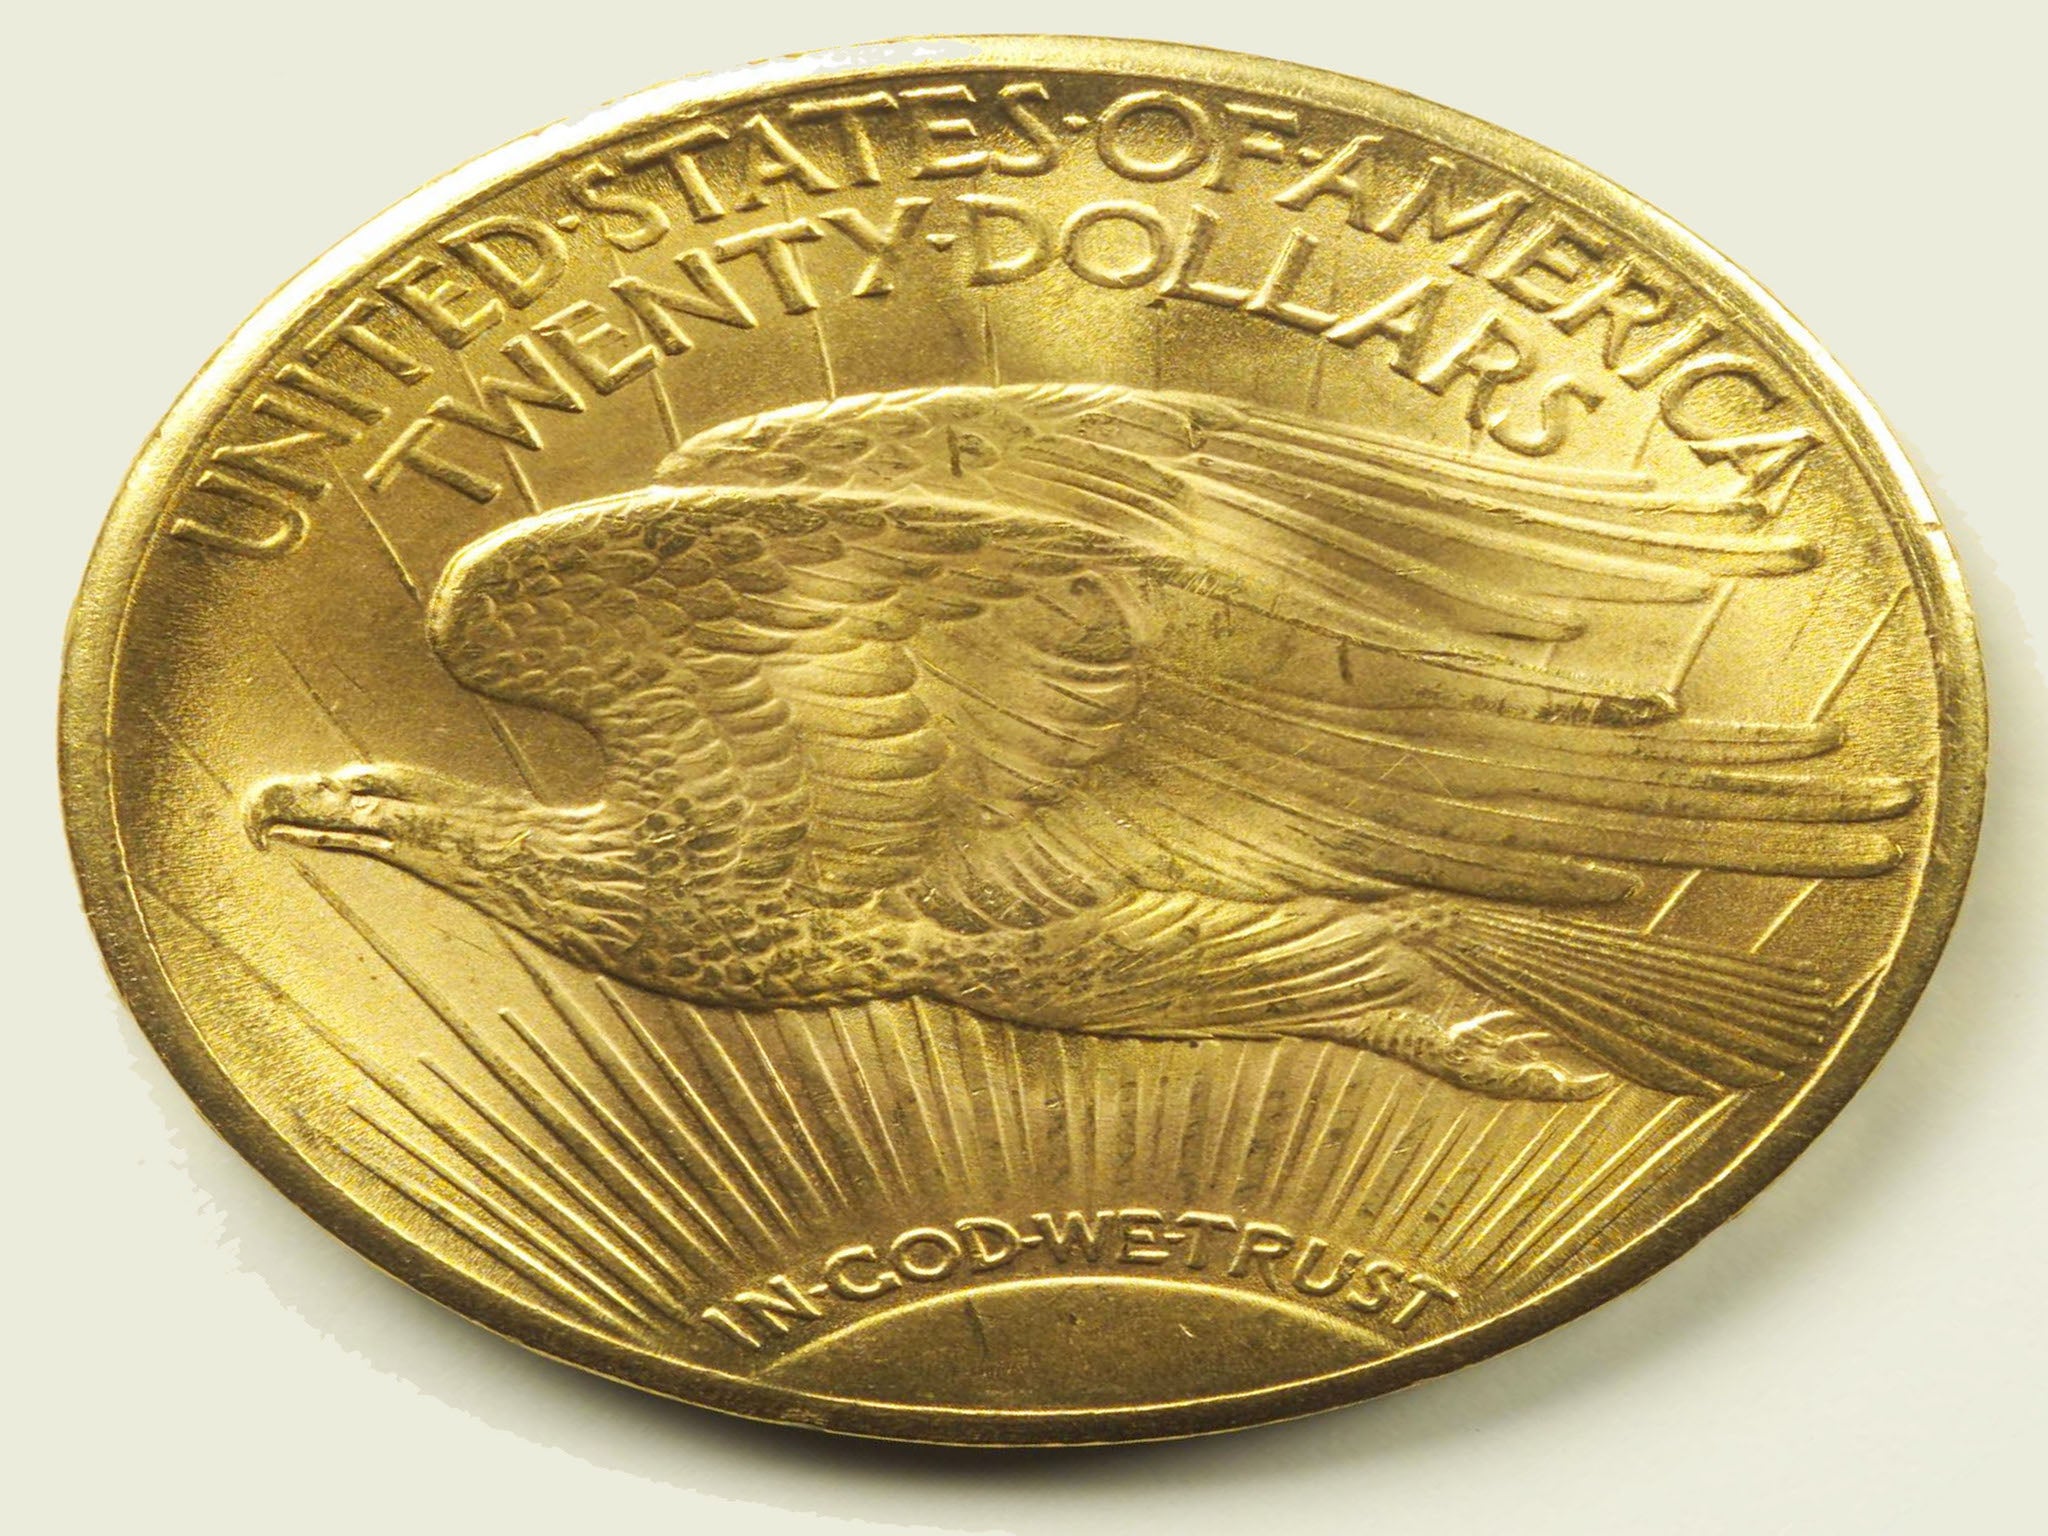 In 2002 a 1933 Double Eagle coin sold for $7.6m